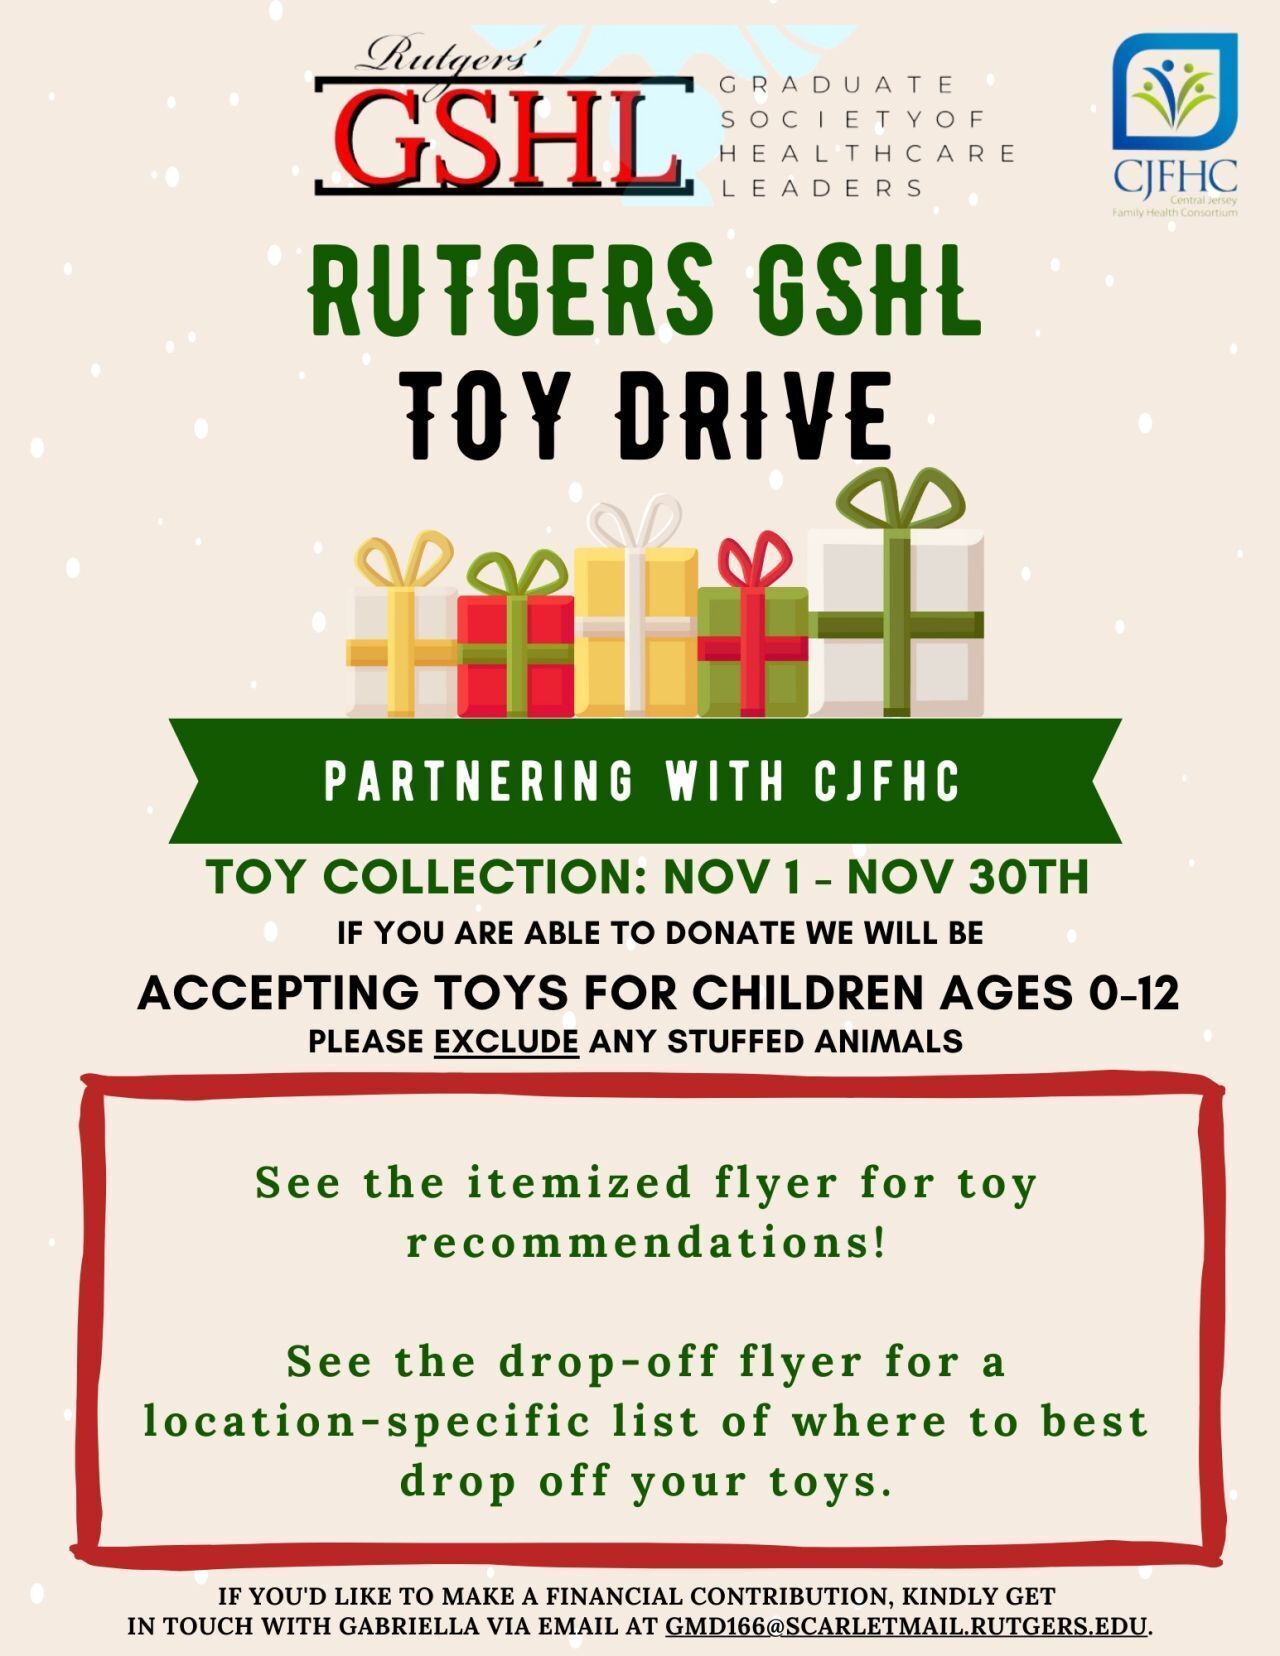 CJFHC Partnering with Rutgers Graduate Society of Healthcare Leaders for Toydrive